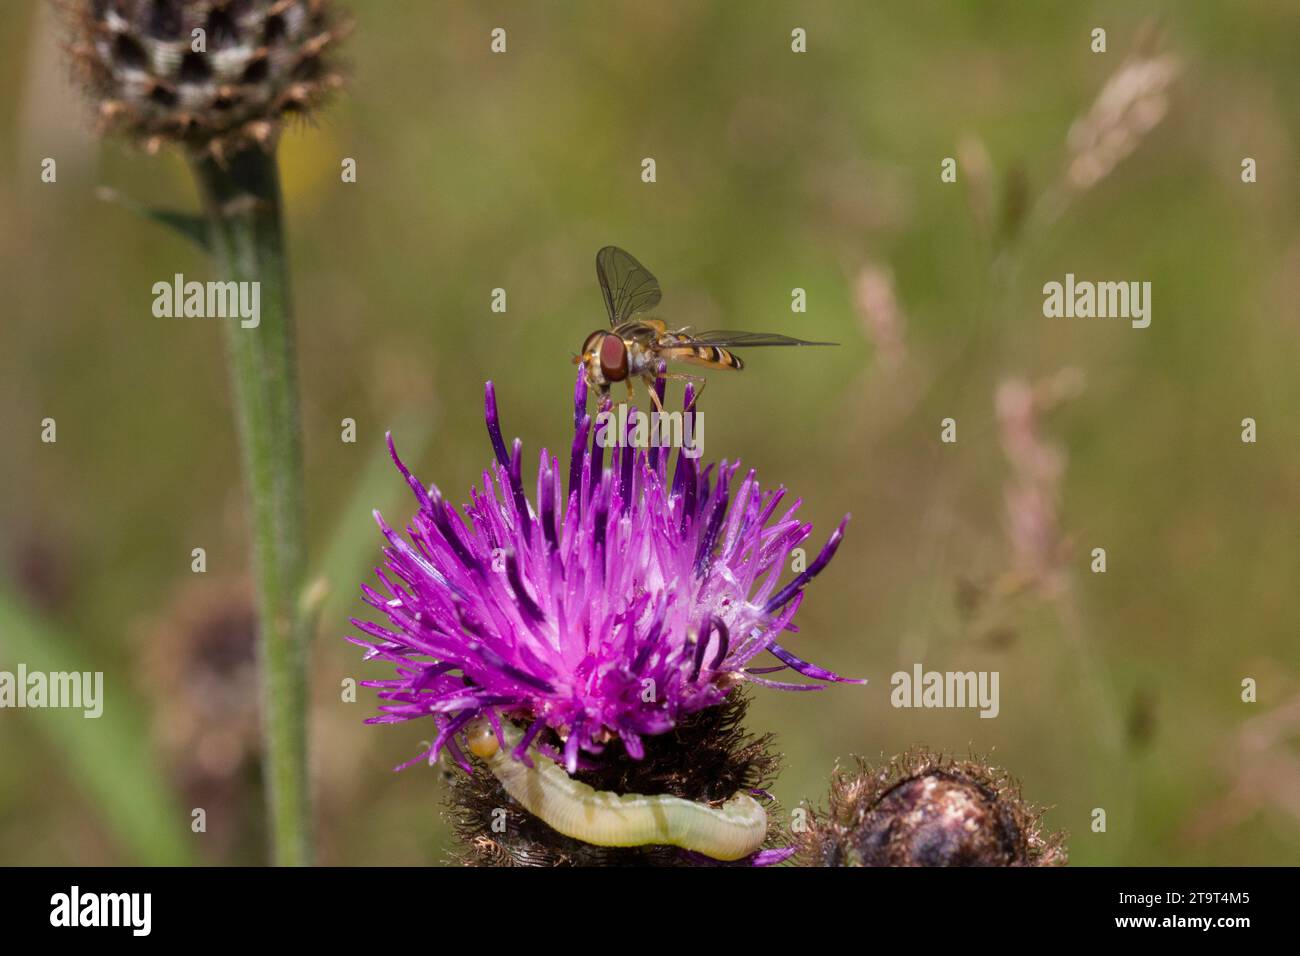 Hoverfly on a Spear Thistle, Regno Unito Foto Stock